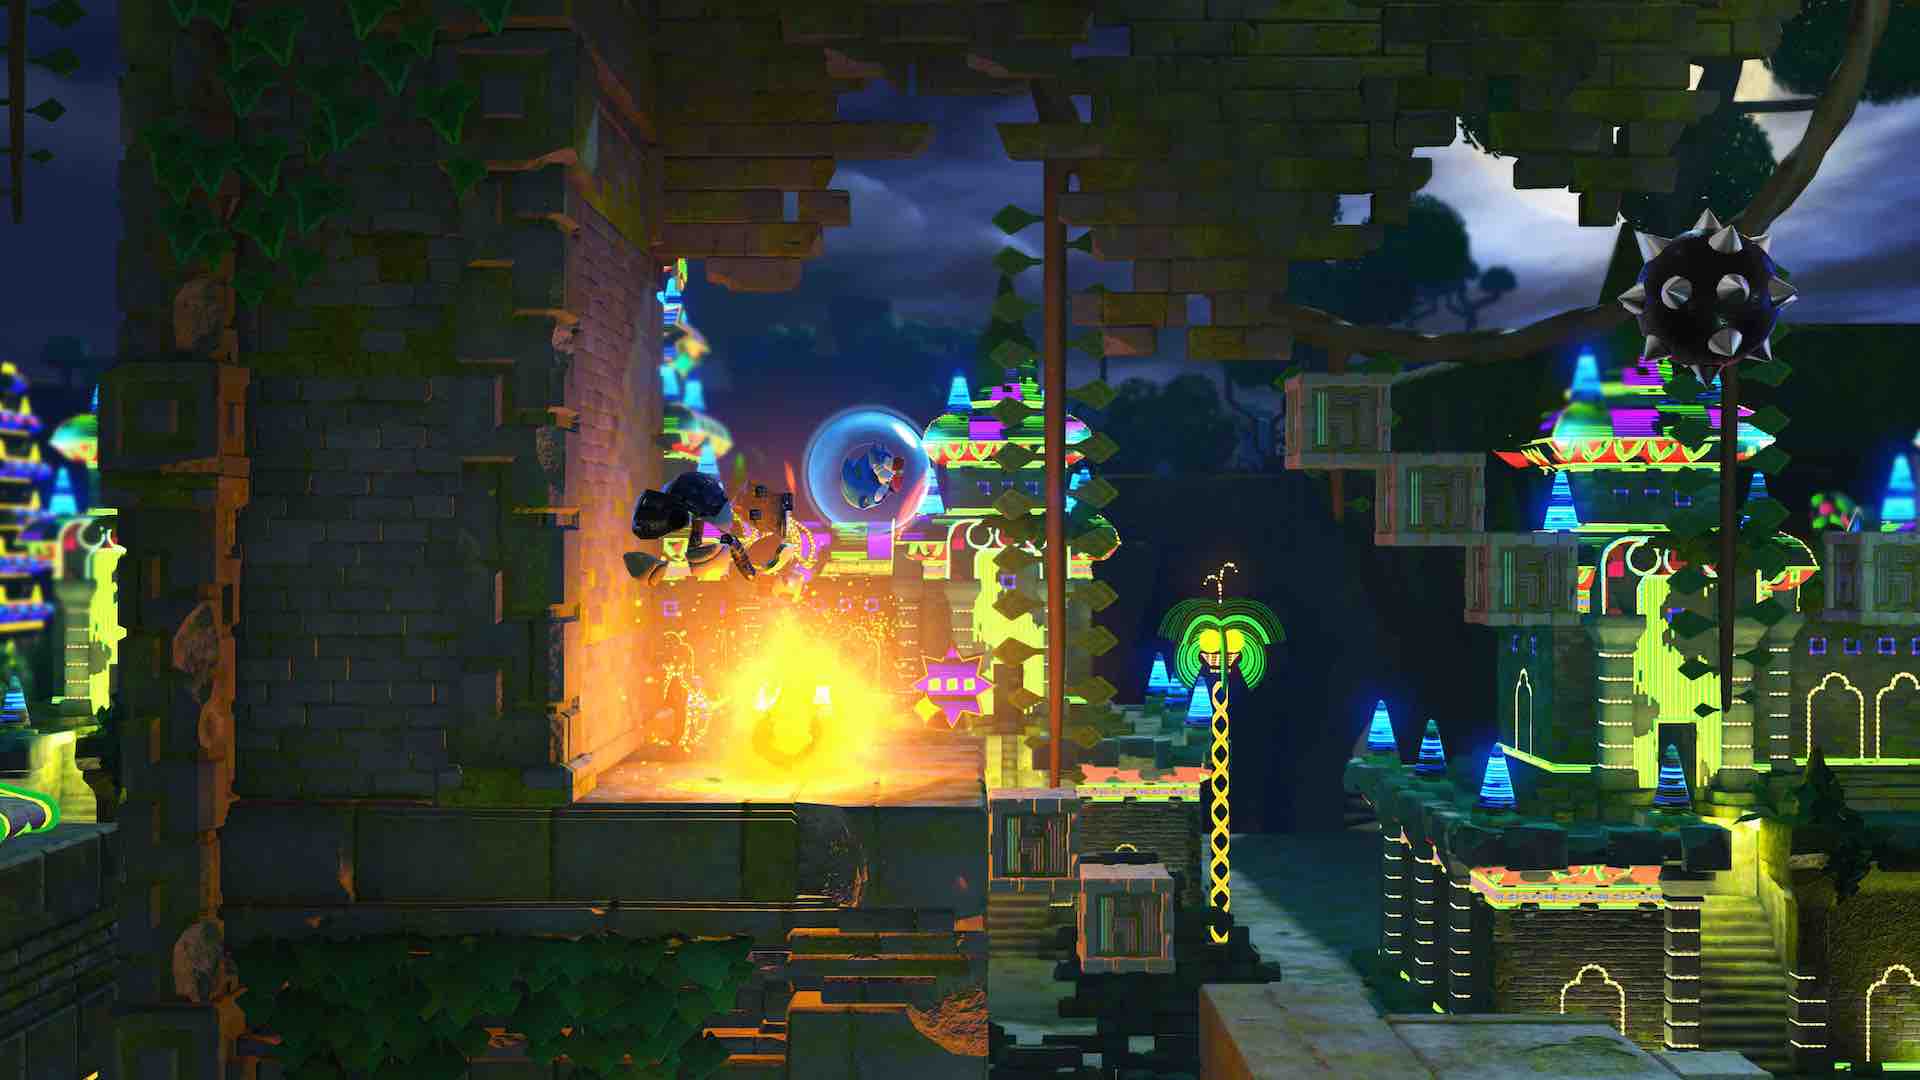 sonic-forces-casino-forest-screenshot-3